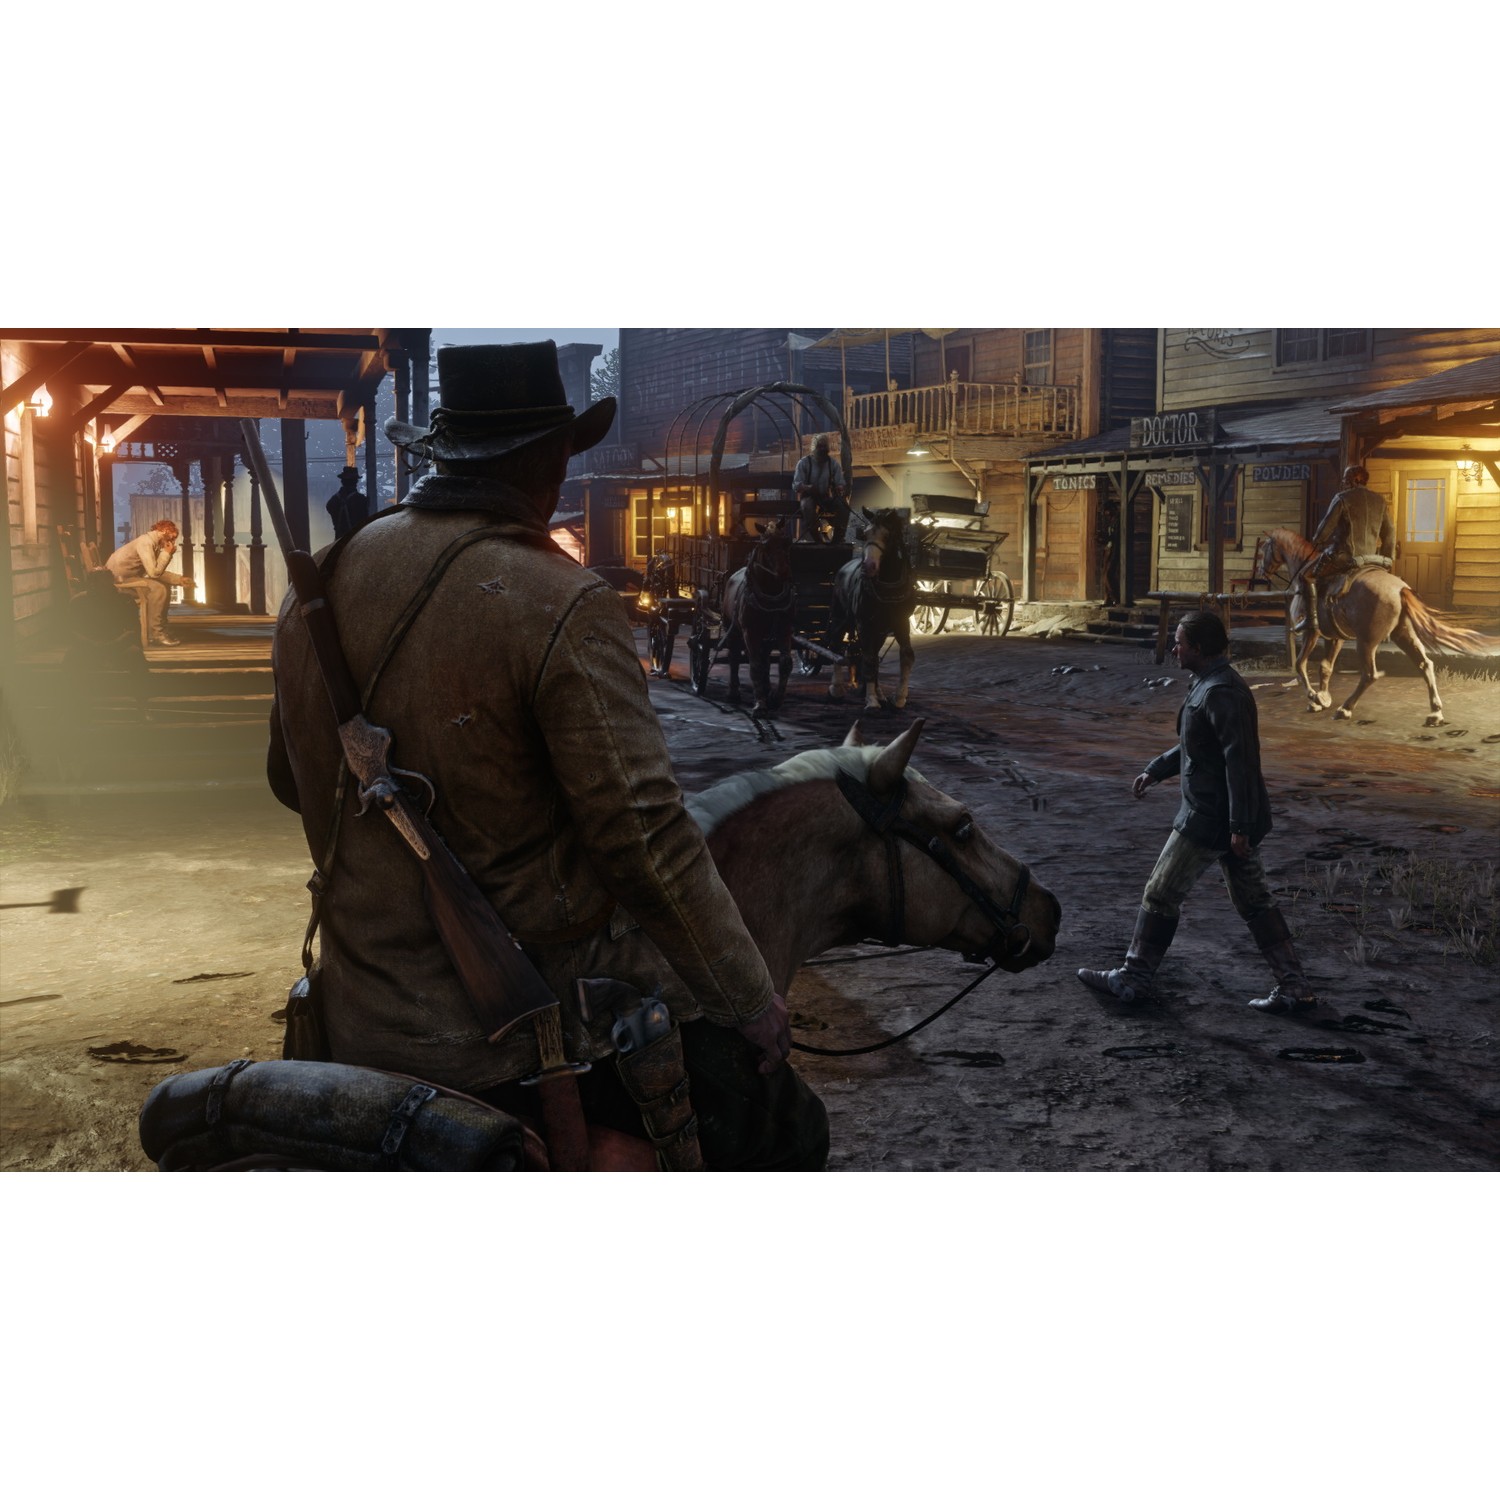 Игра xbox one red dead. Red Dead Redemption 2 ps4. Ред дед редемпшен 2 ps4. Игра на PS 4 ред дед редемпшн. Red Dead Redemption 2 на пс4.